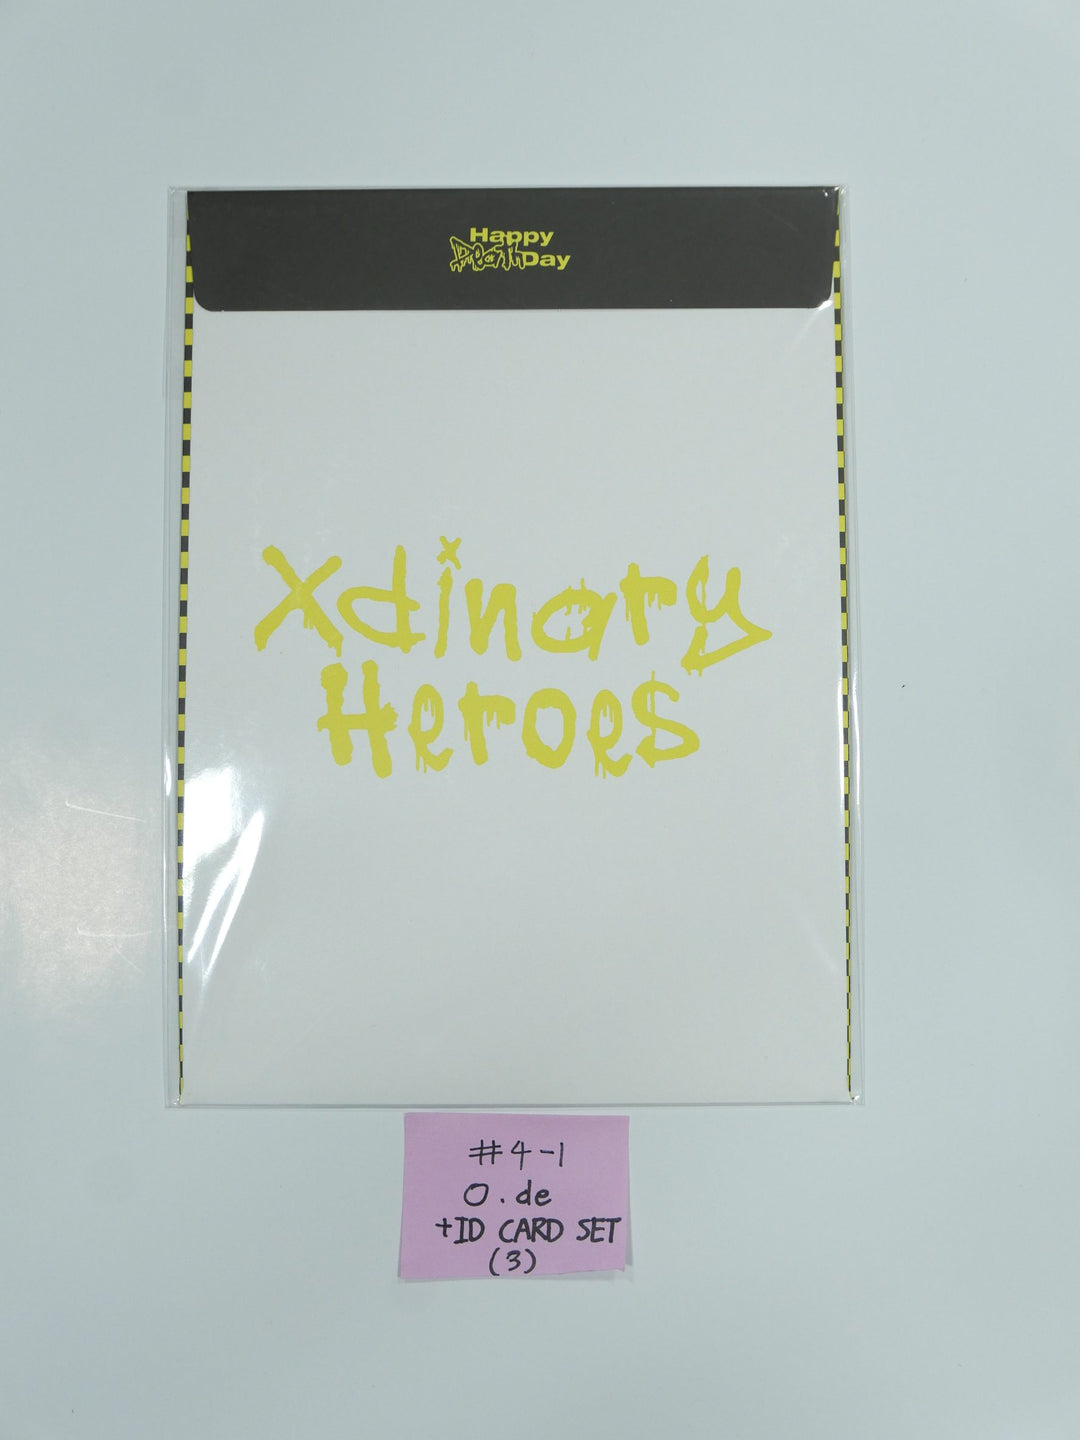 Xdinary Heroes - 2022 Happy Death Official MD